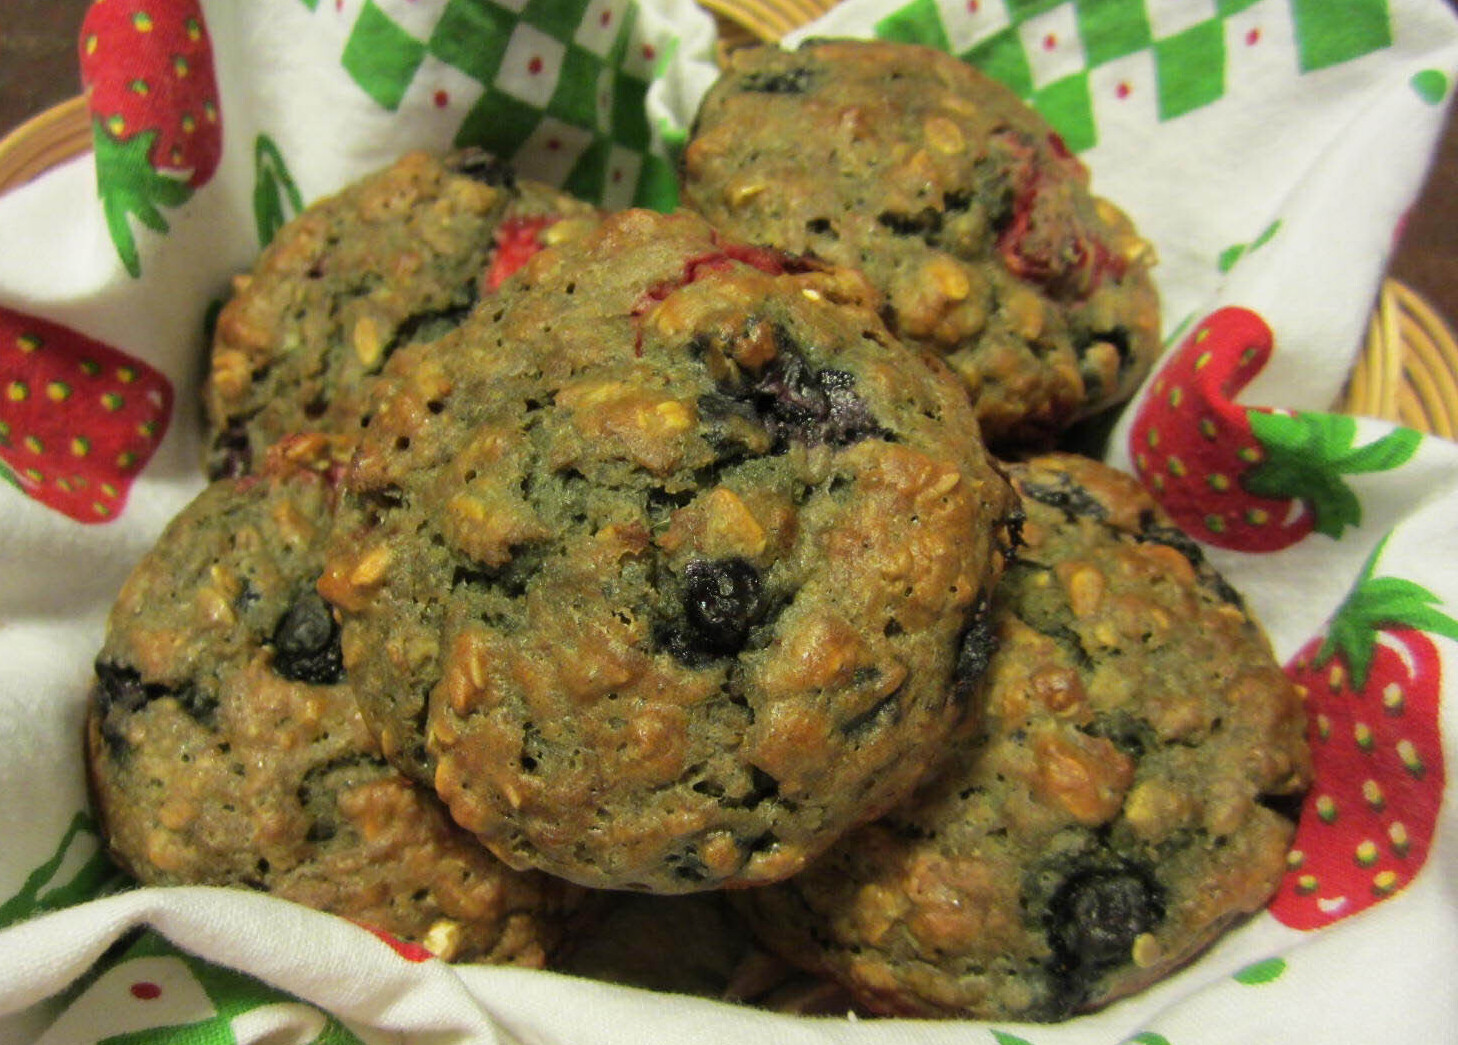 A basket full of oat blueberry muffins